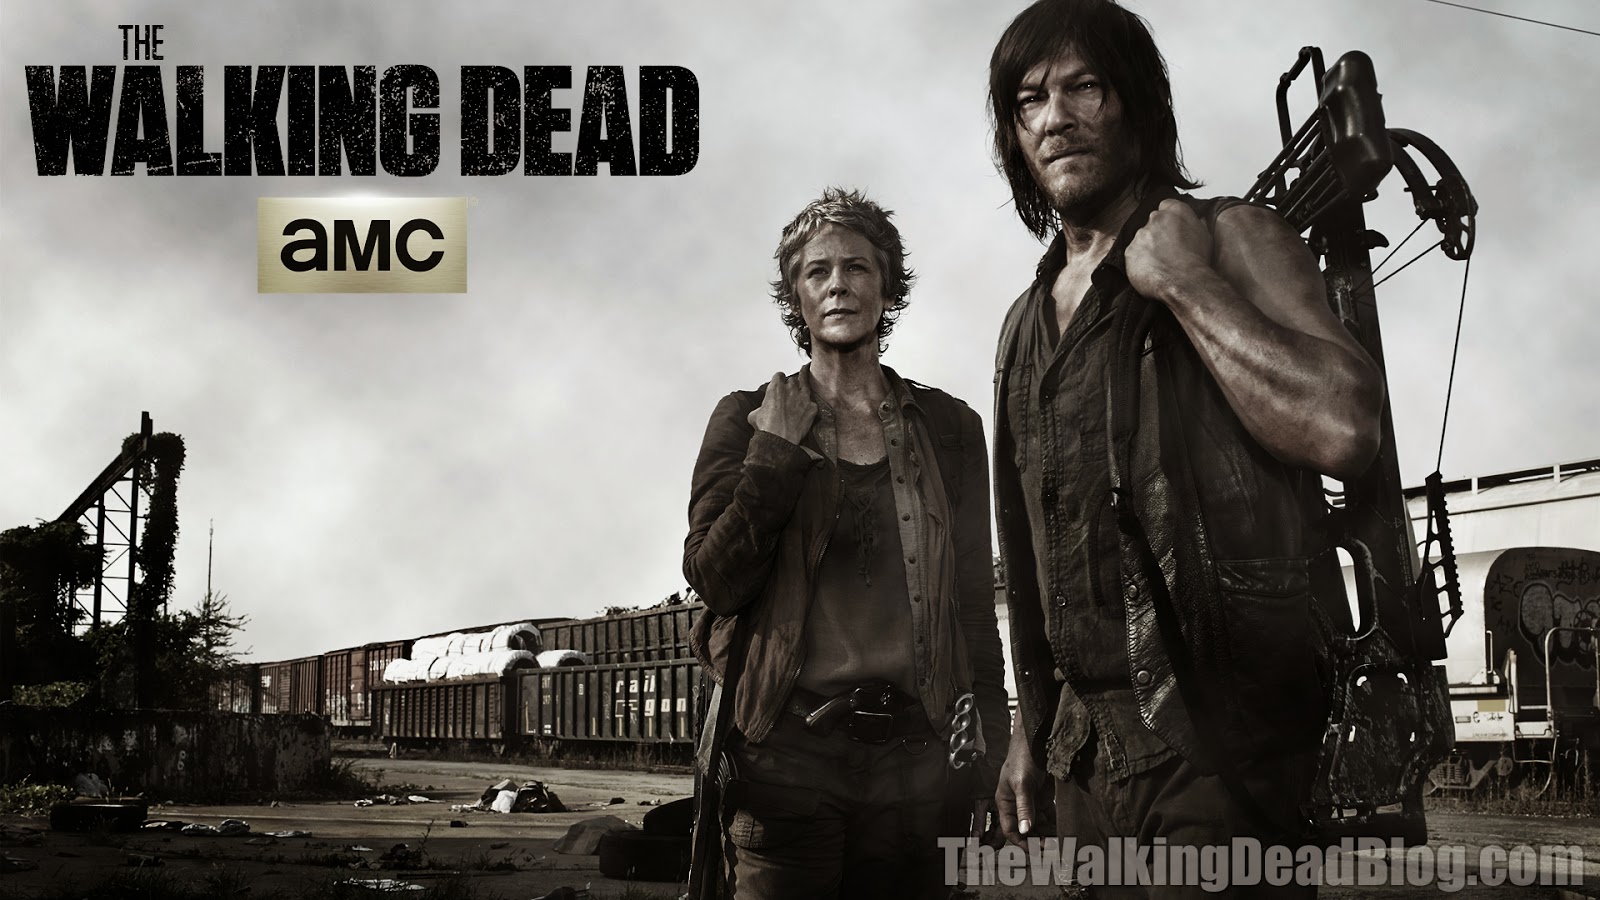 the walking dead wallpaper,movie,poster,font,album cover,photography